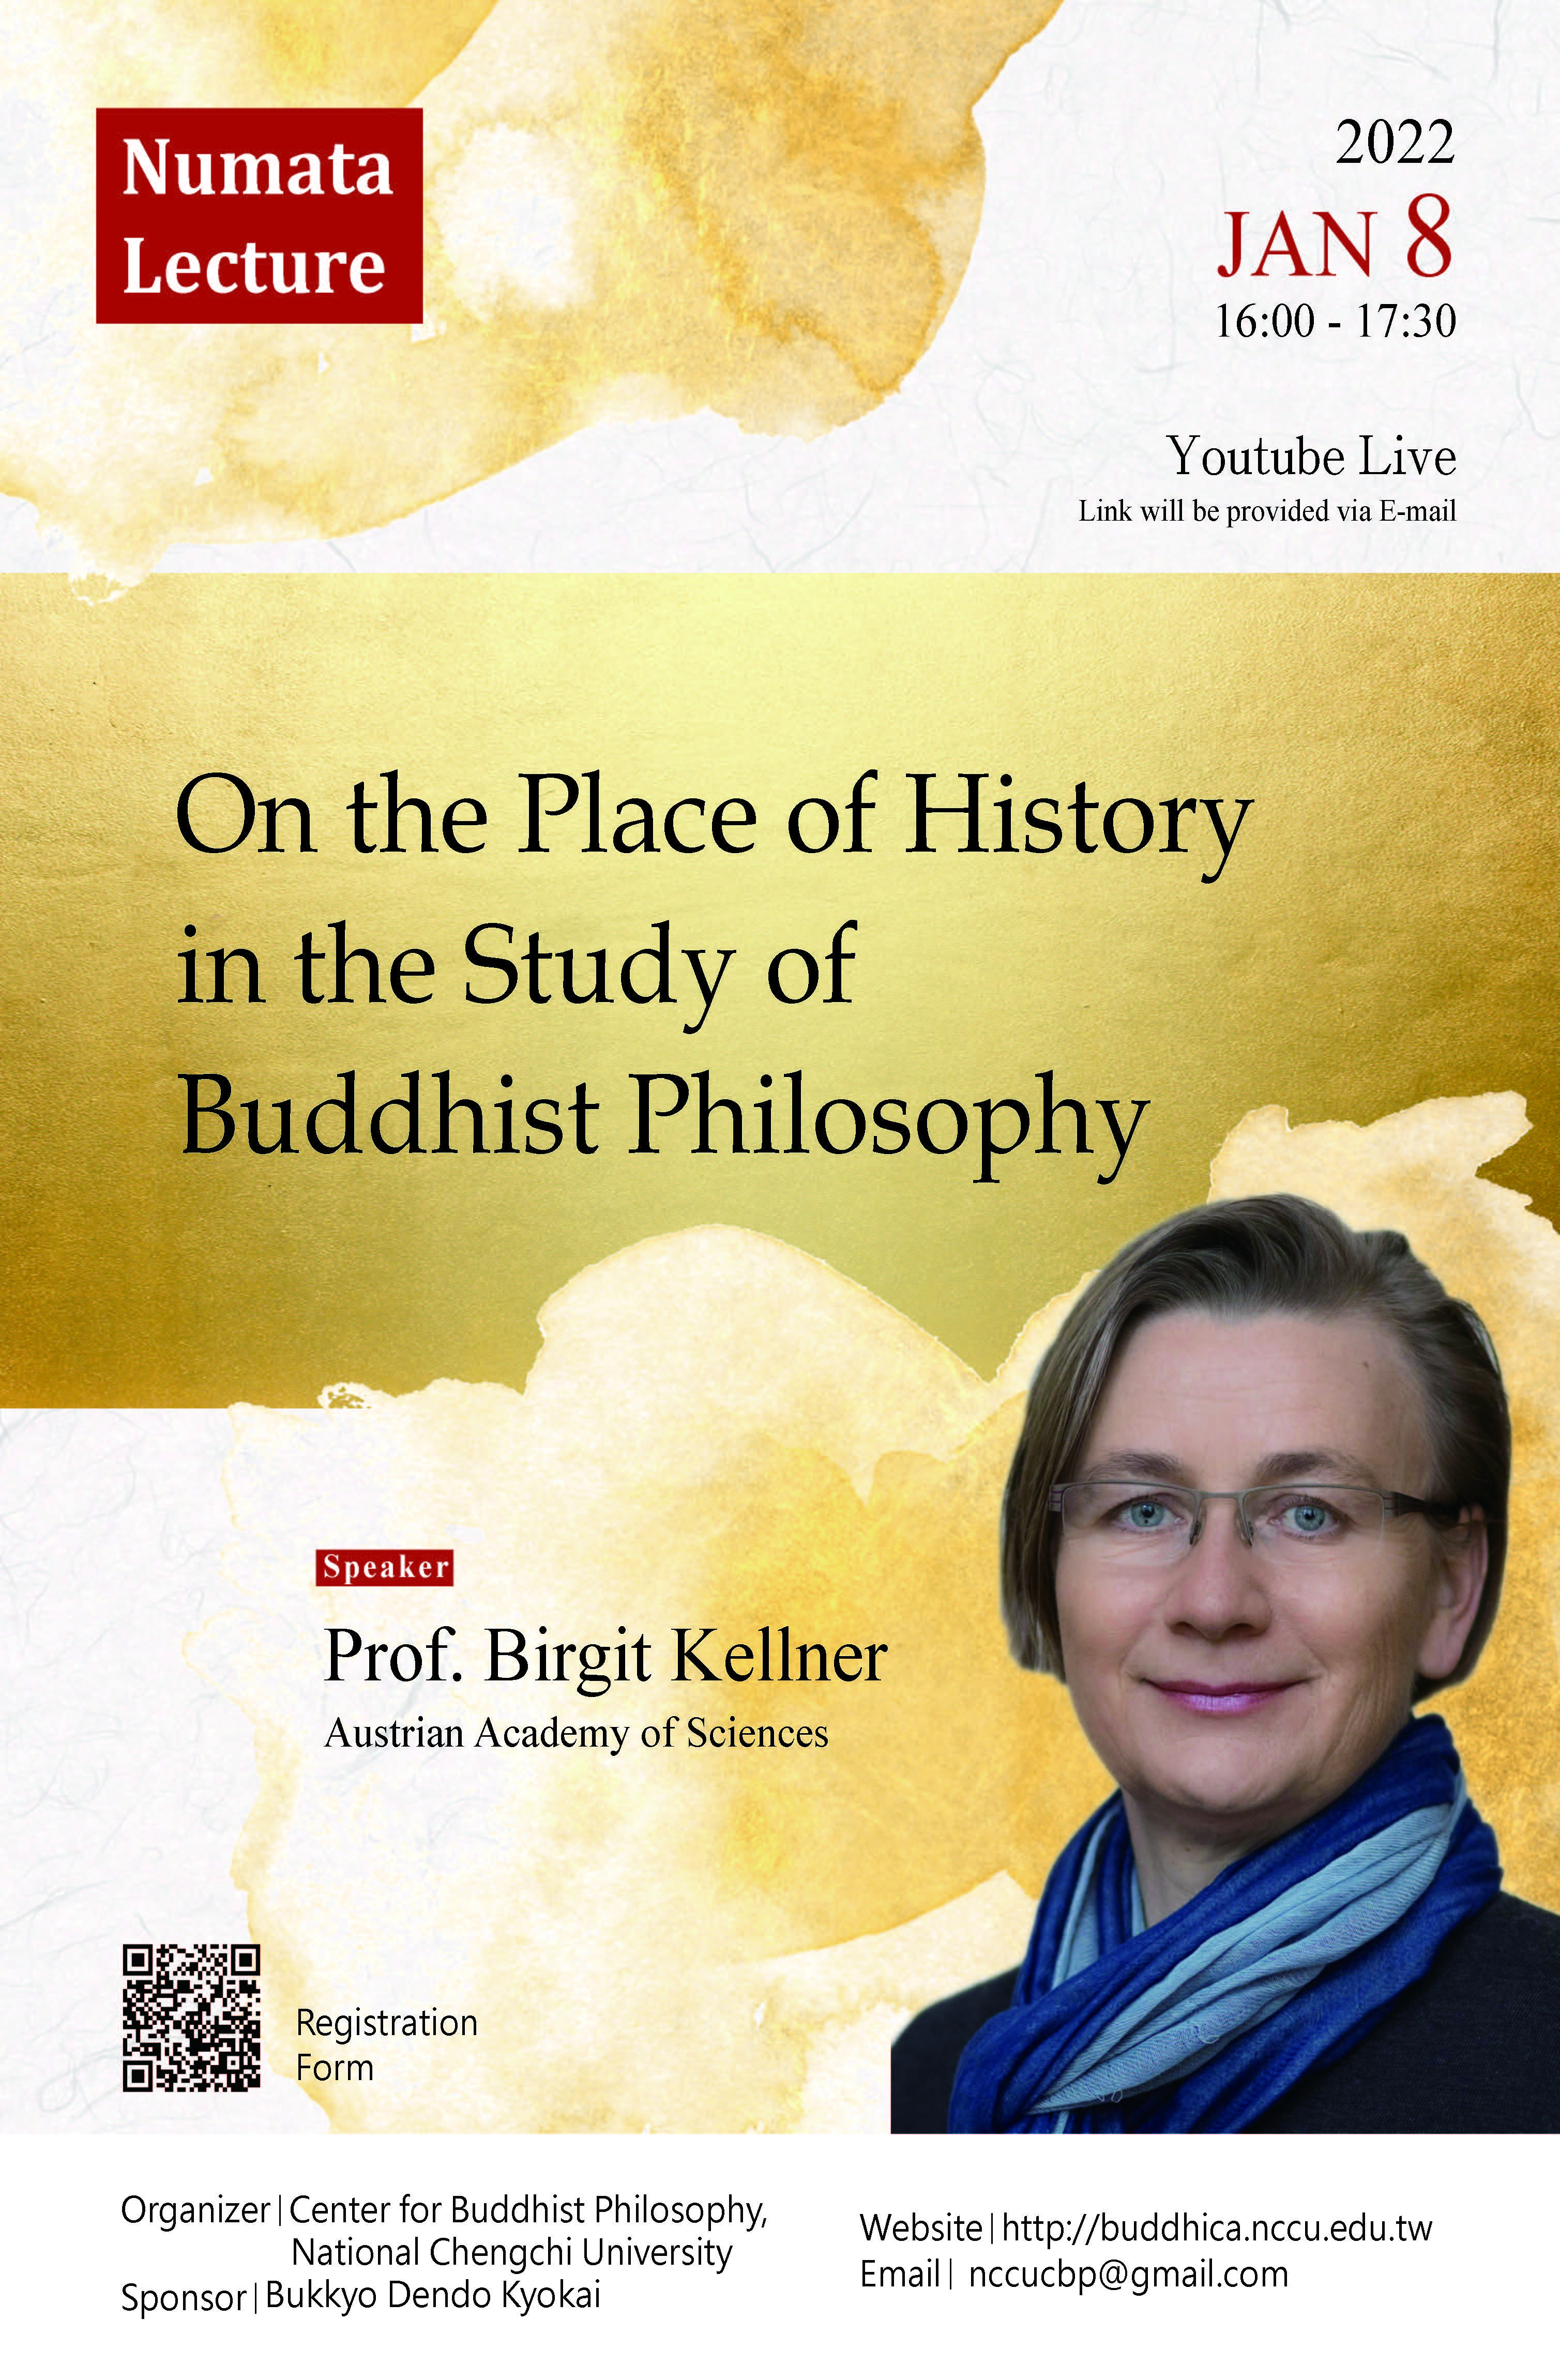 [Numata Lecture] On the Place of History in the Study of Buddhist Philosophy